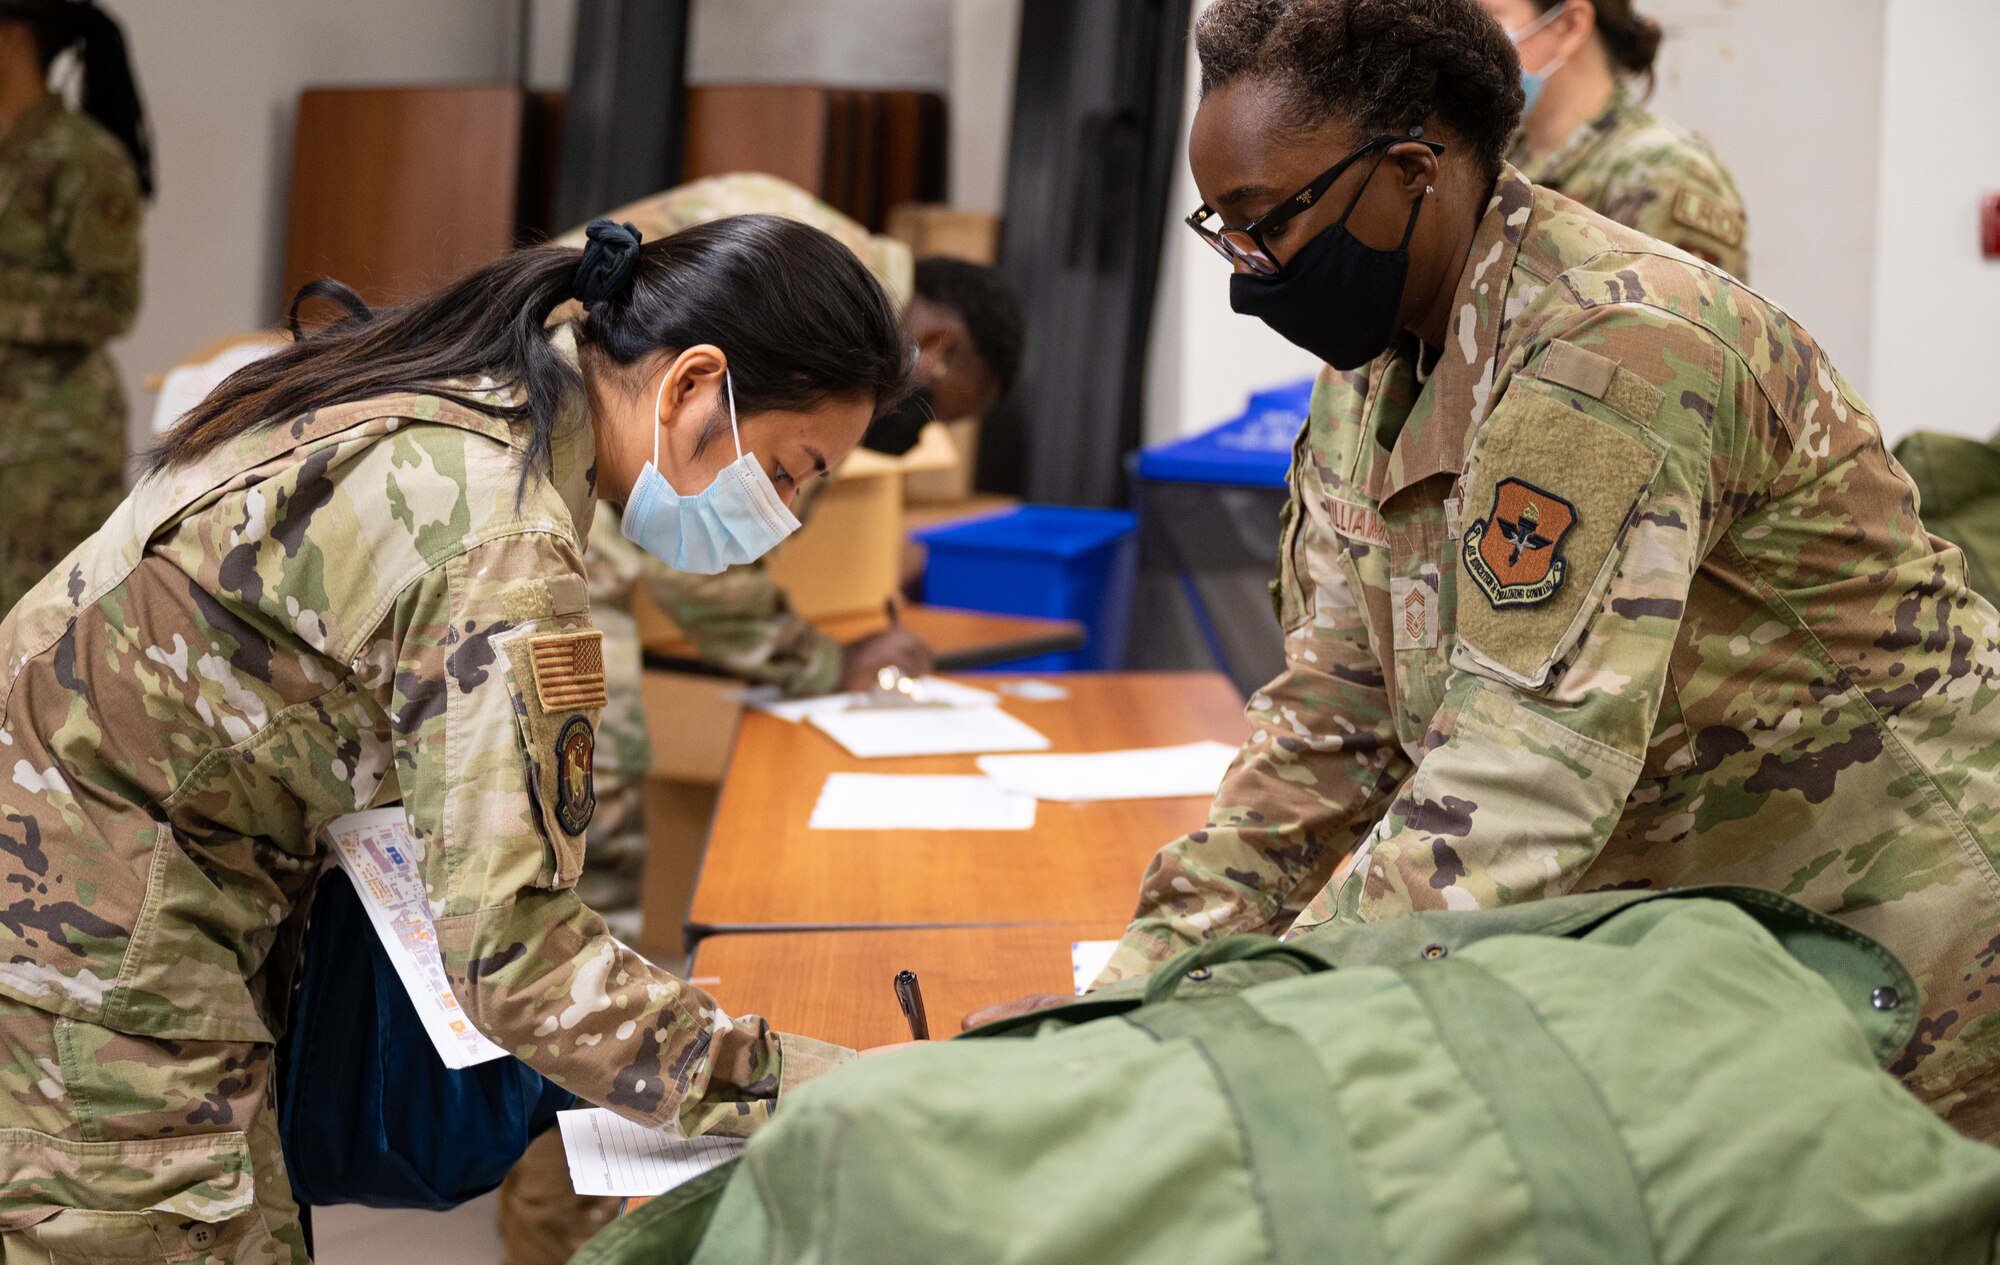 U.S. Air Force Chief Master Sgt. Felicia Williams, right, 56th Logistics Readiness Squadron chief enlisted manager, issues individual protective gear to an Airman assigned to the 56th Fighter Wing Aug. 30, 2021, at Luke Air Force Base, Arizona. More than 70 Luke AFB Airmen deployed to Holloman AFB, New Mexico, in support of Operation Allies Welcome. The operation supports the temporary provision of medical screening, lodging, and other general support for Afghan evacuees and their families arriving to several military installations in the United States. (U.S. Air Force photo by Senior Airman Leala Marquez)